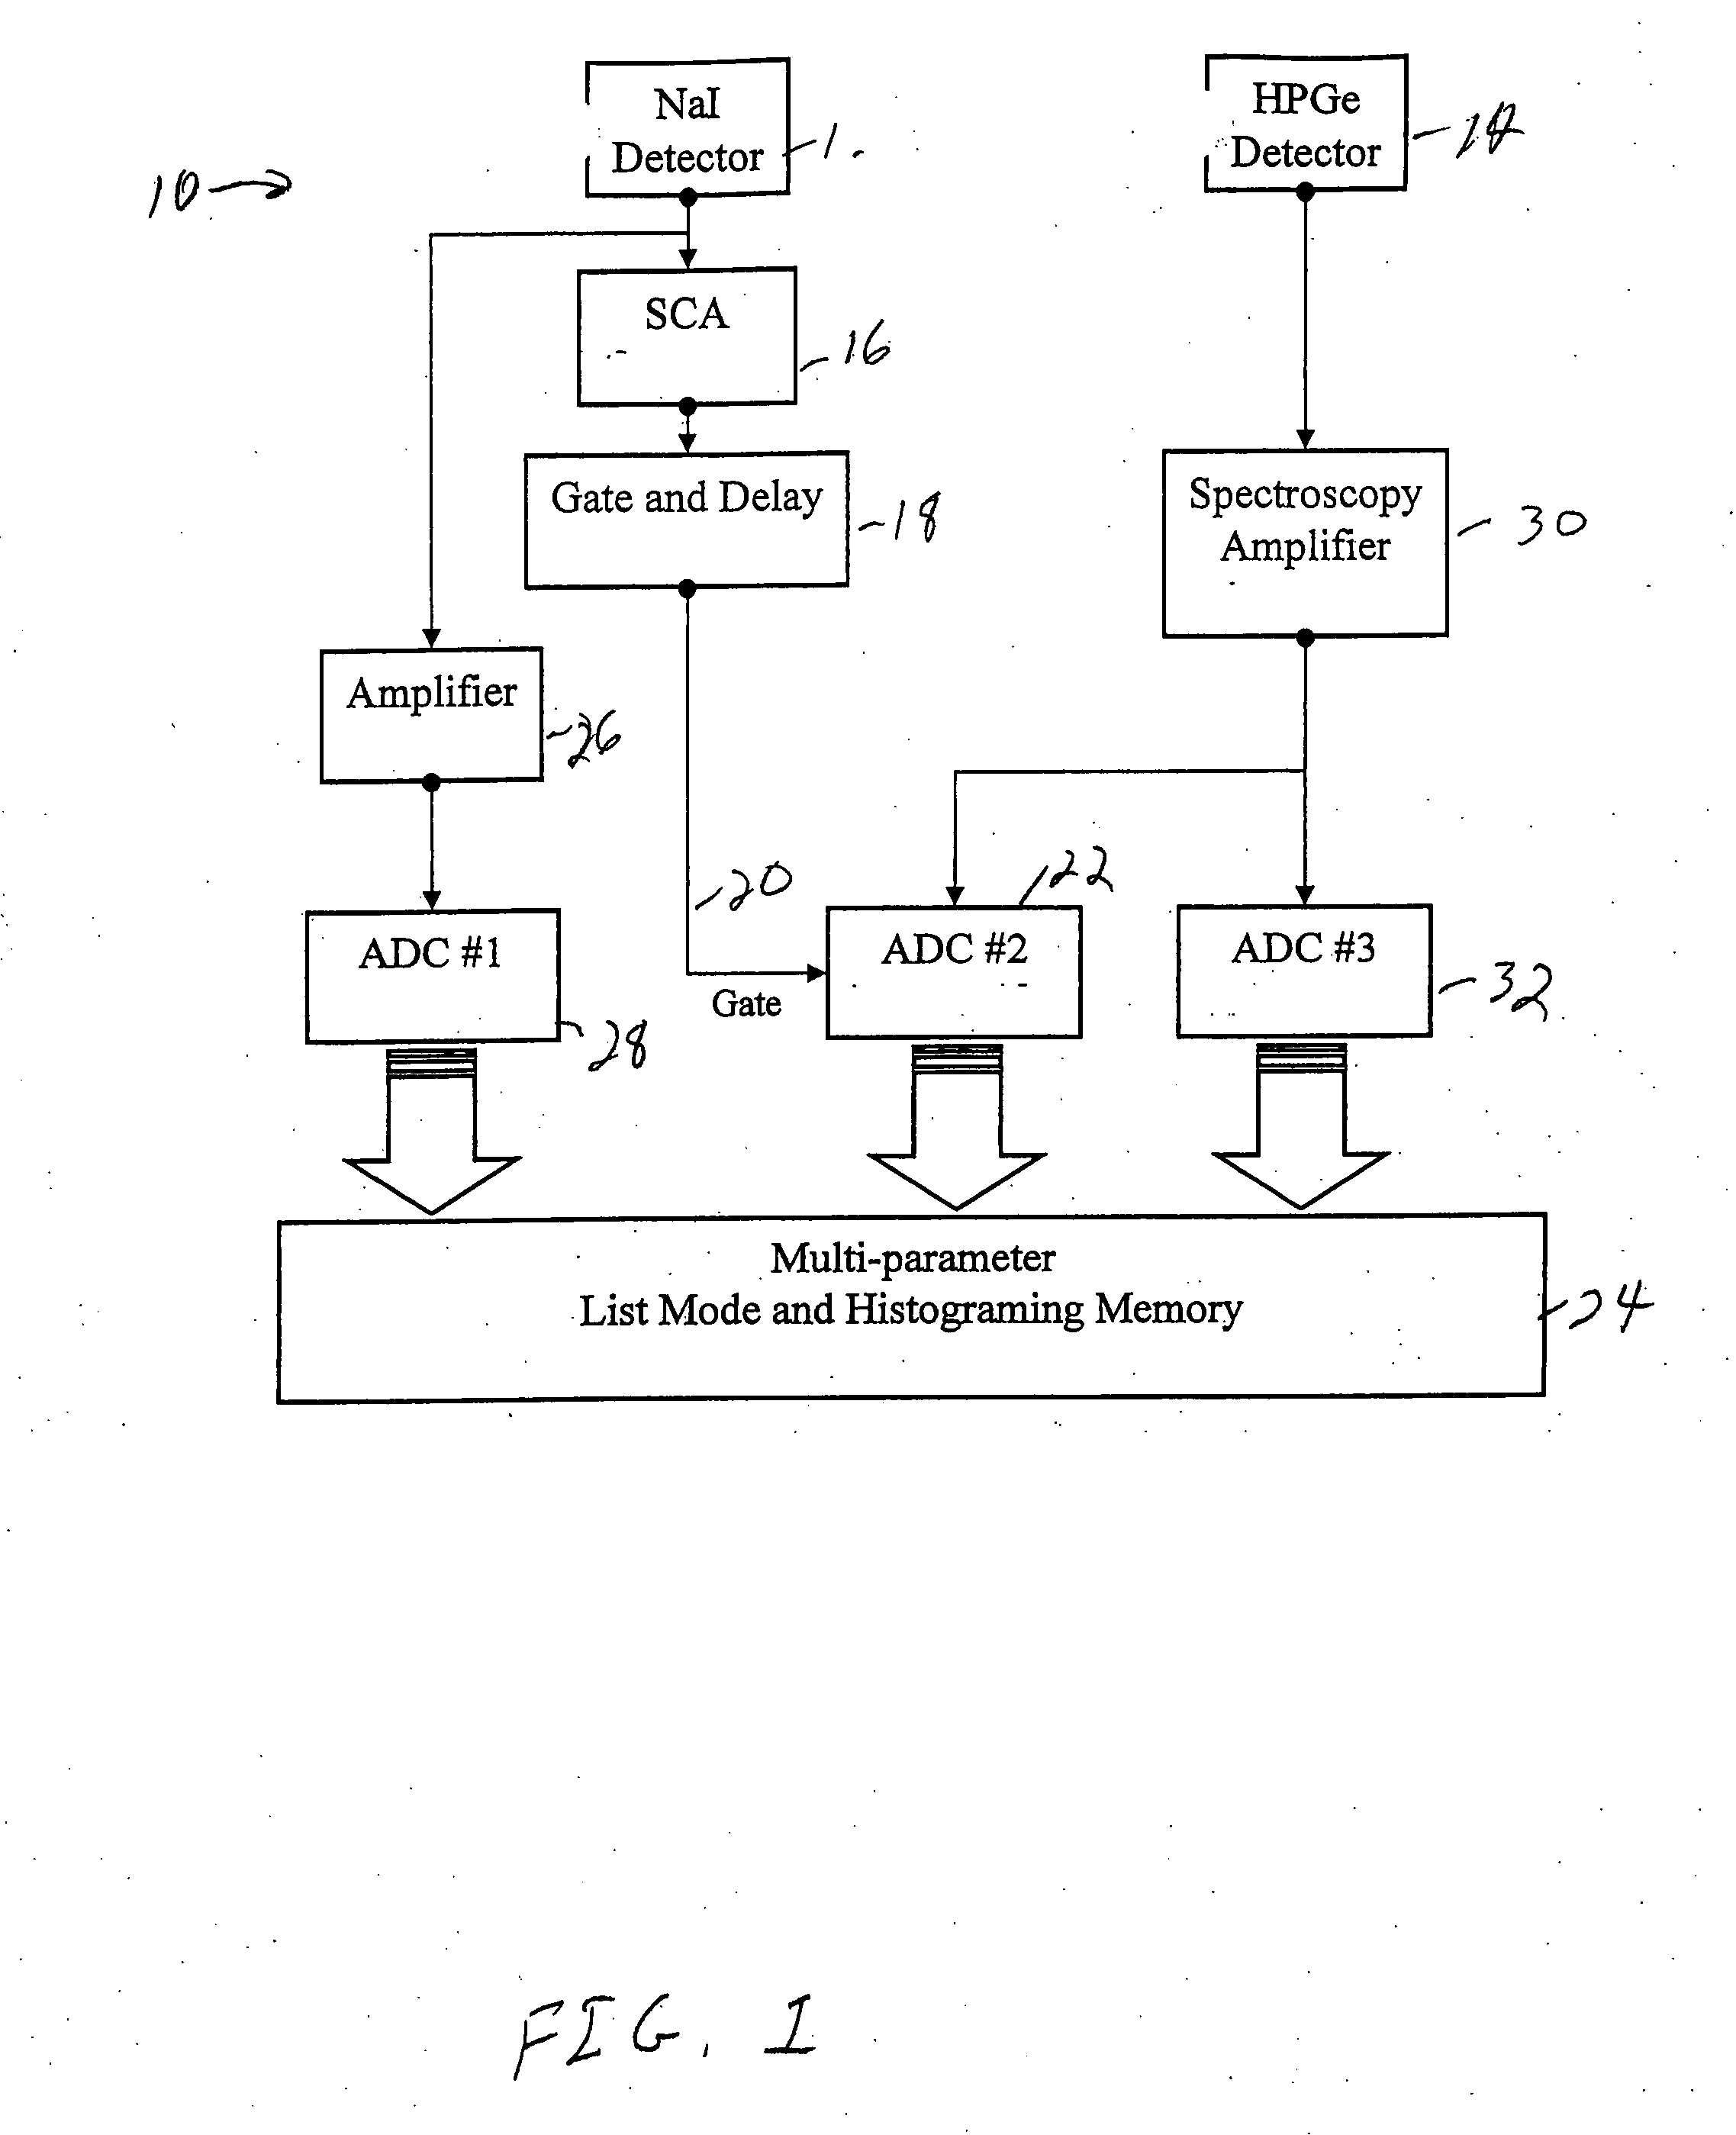 Defect imaging device and method